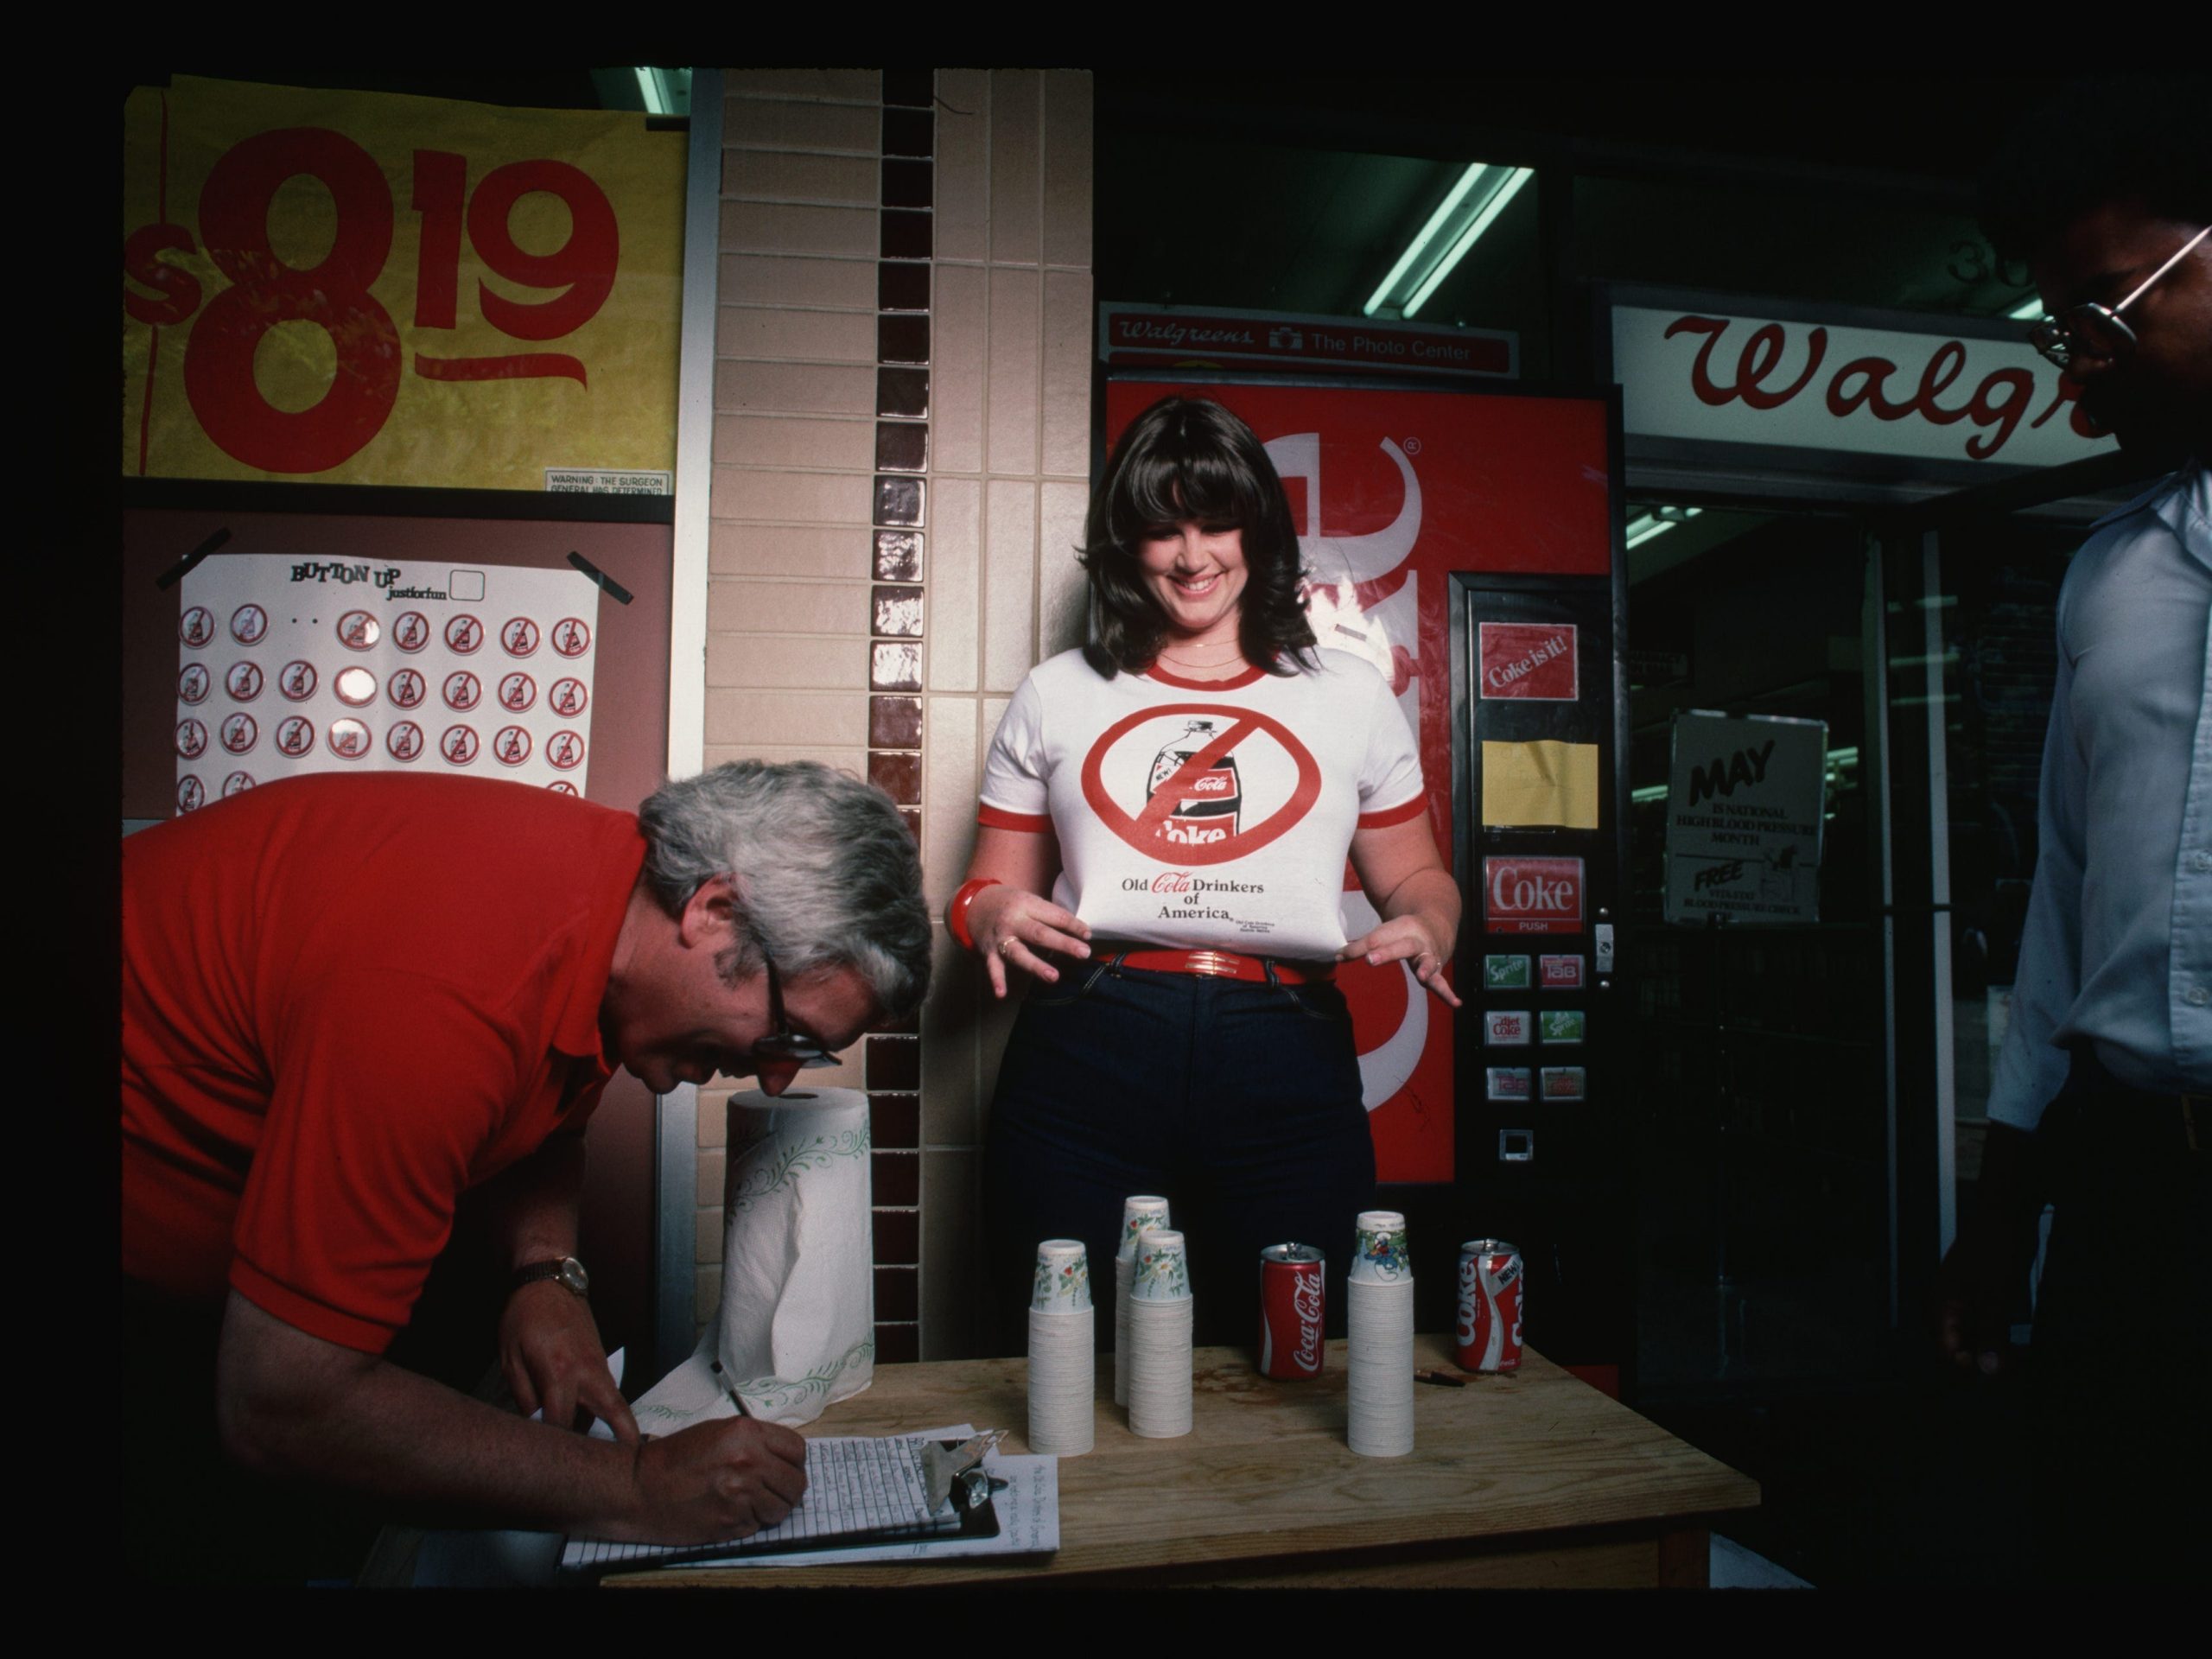 Outside a Walgreens, Karen Wilson gathers signatures on a petition to the Coca-Cola Company expressing dissatisfaction with its "New Coke" formula in 1985.